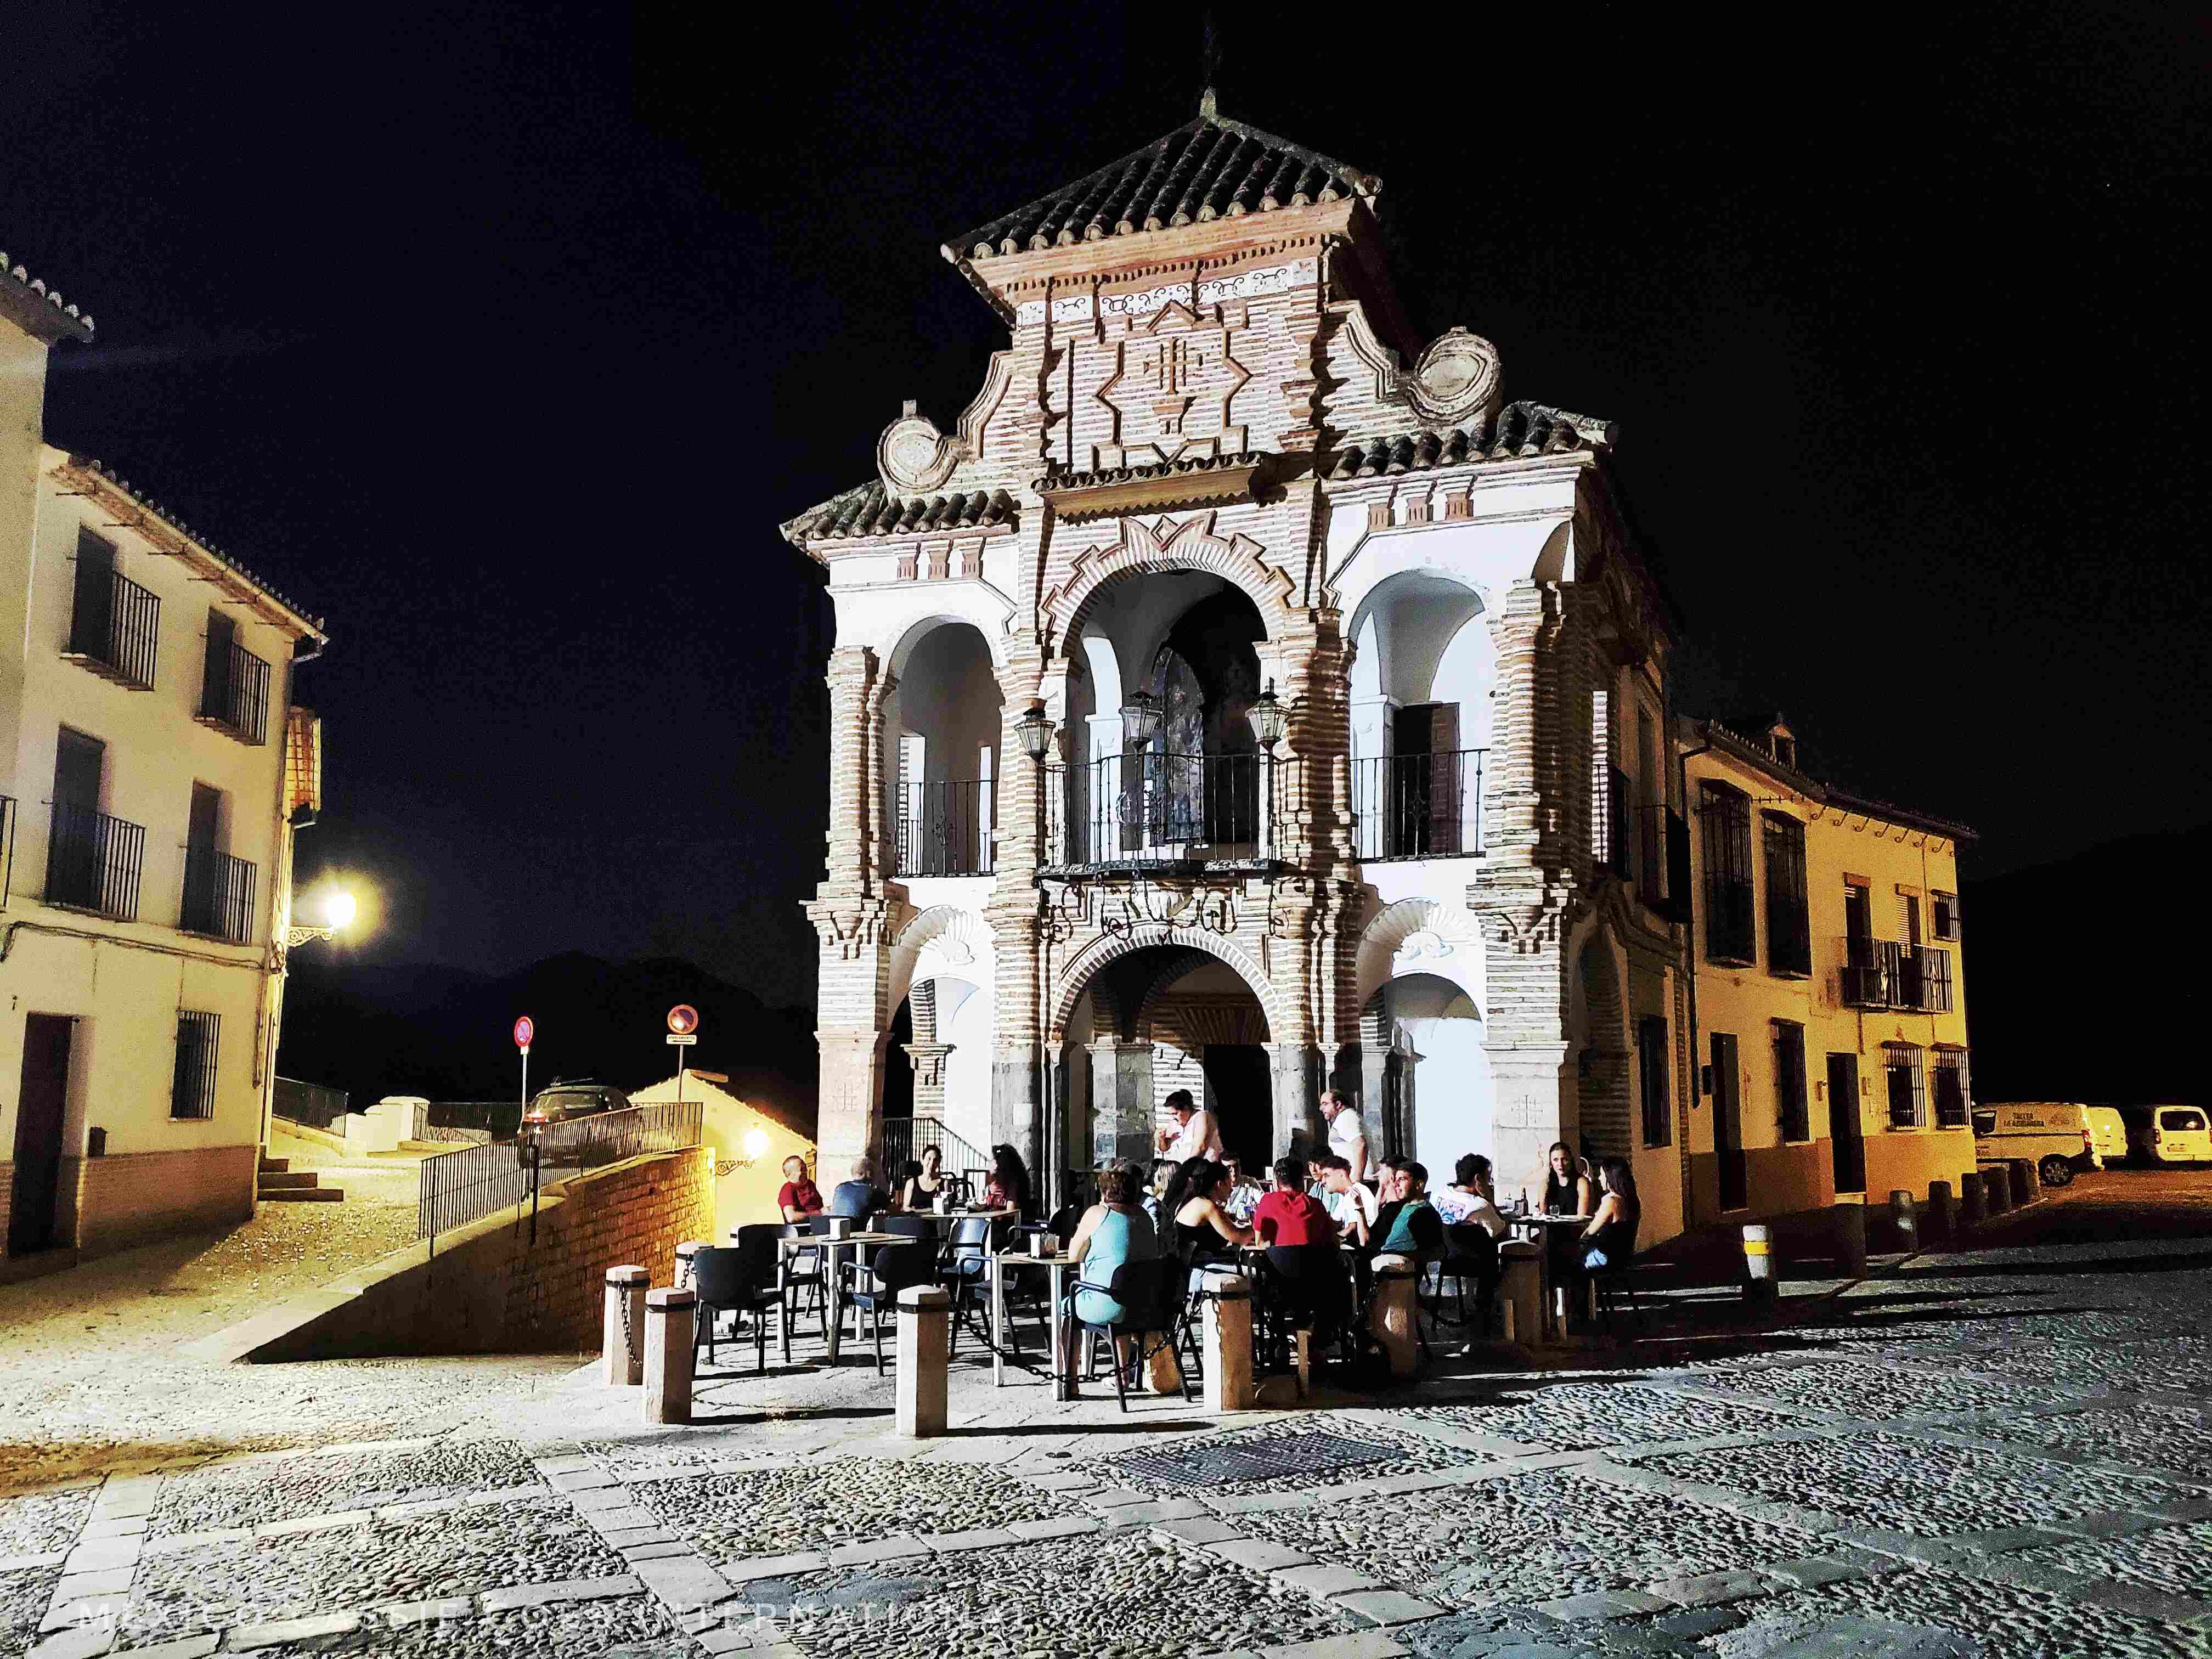 view of a white facade chapel at night. people drinking at tables under the arches